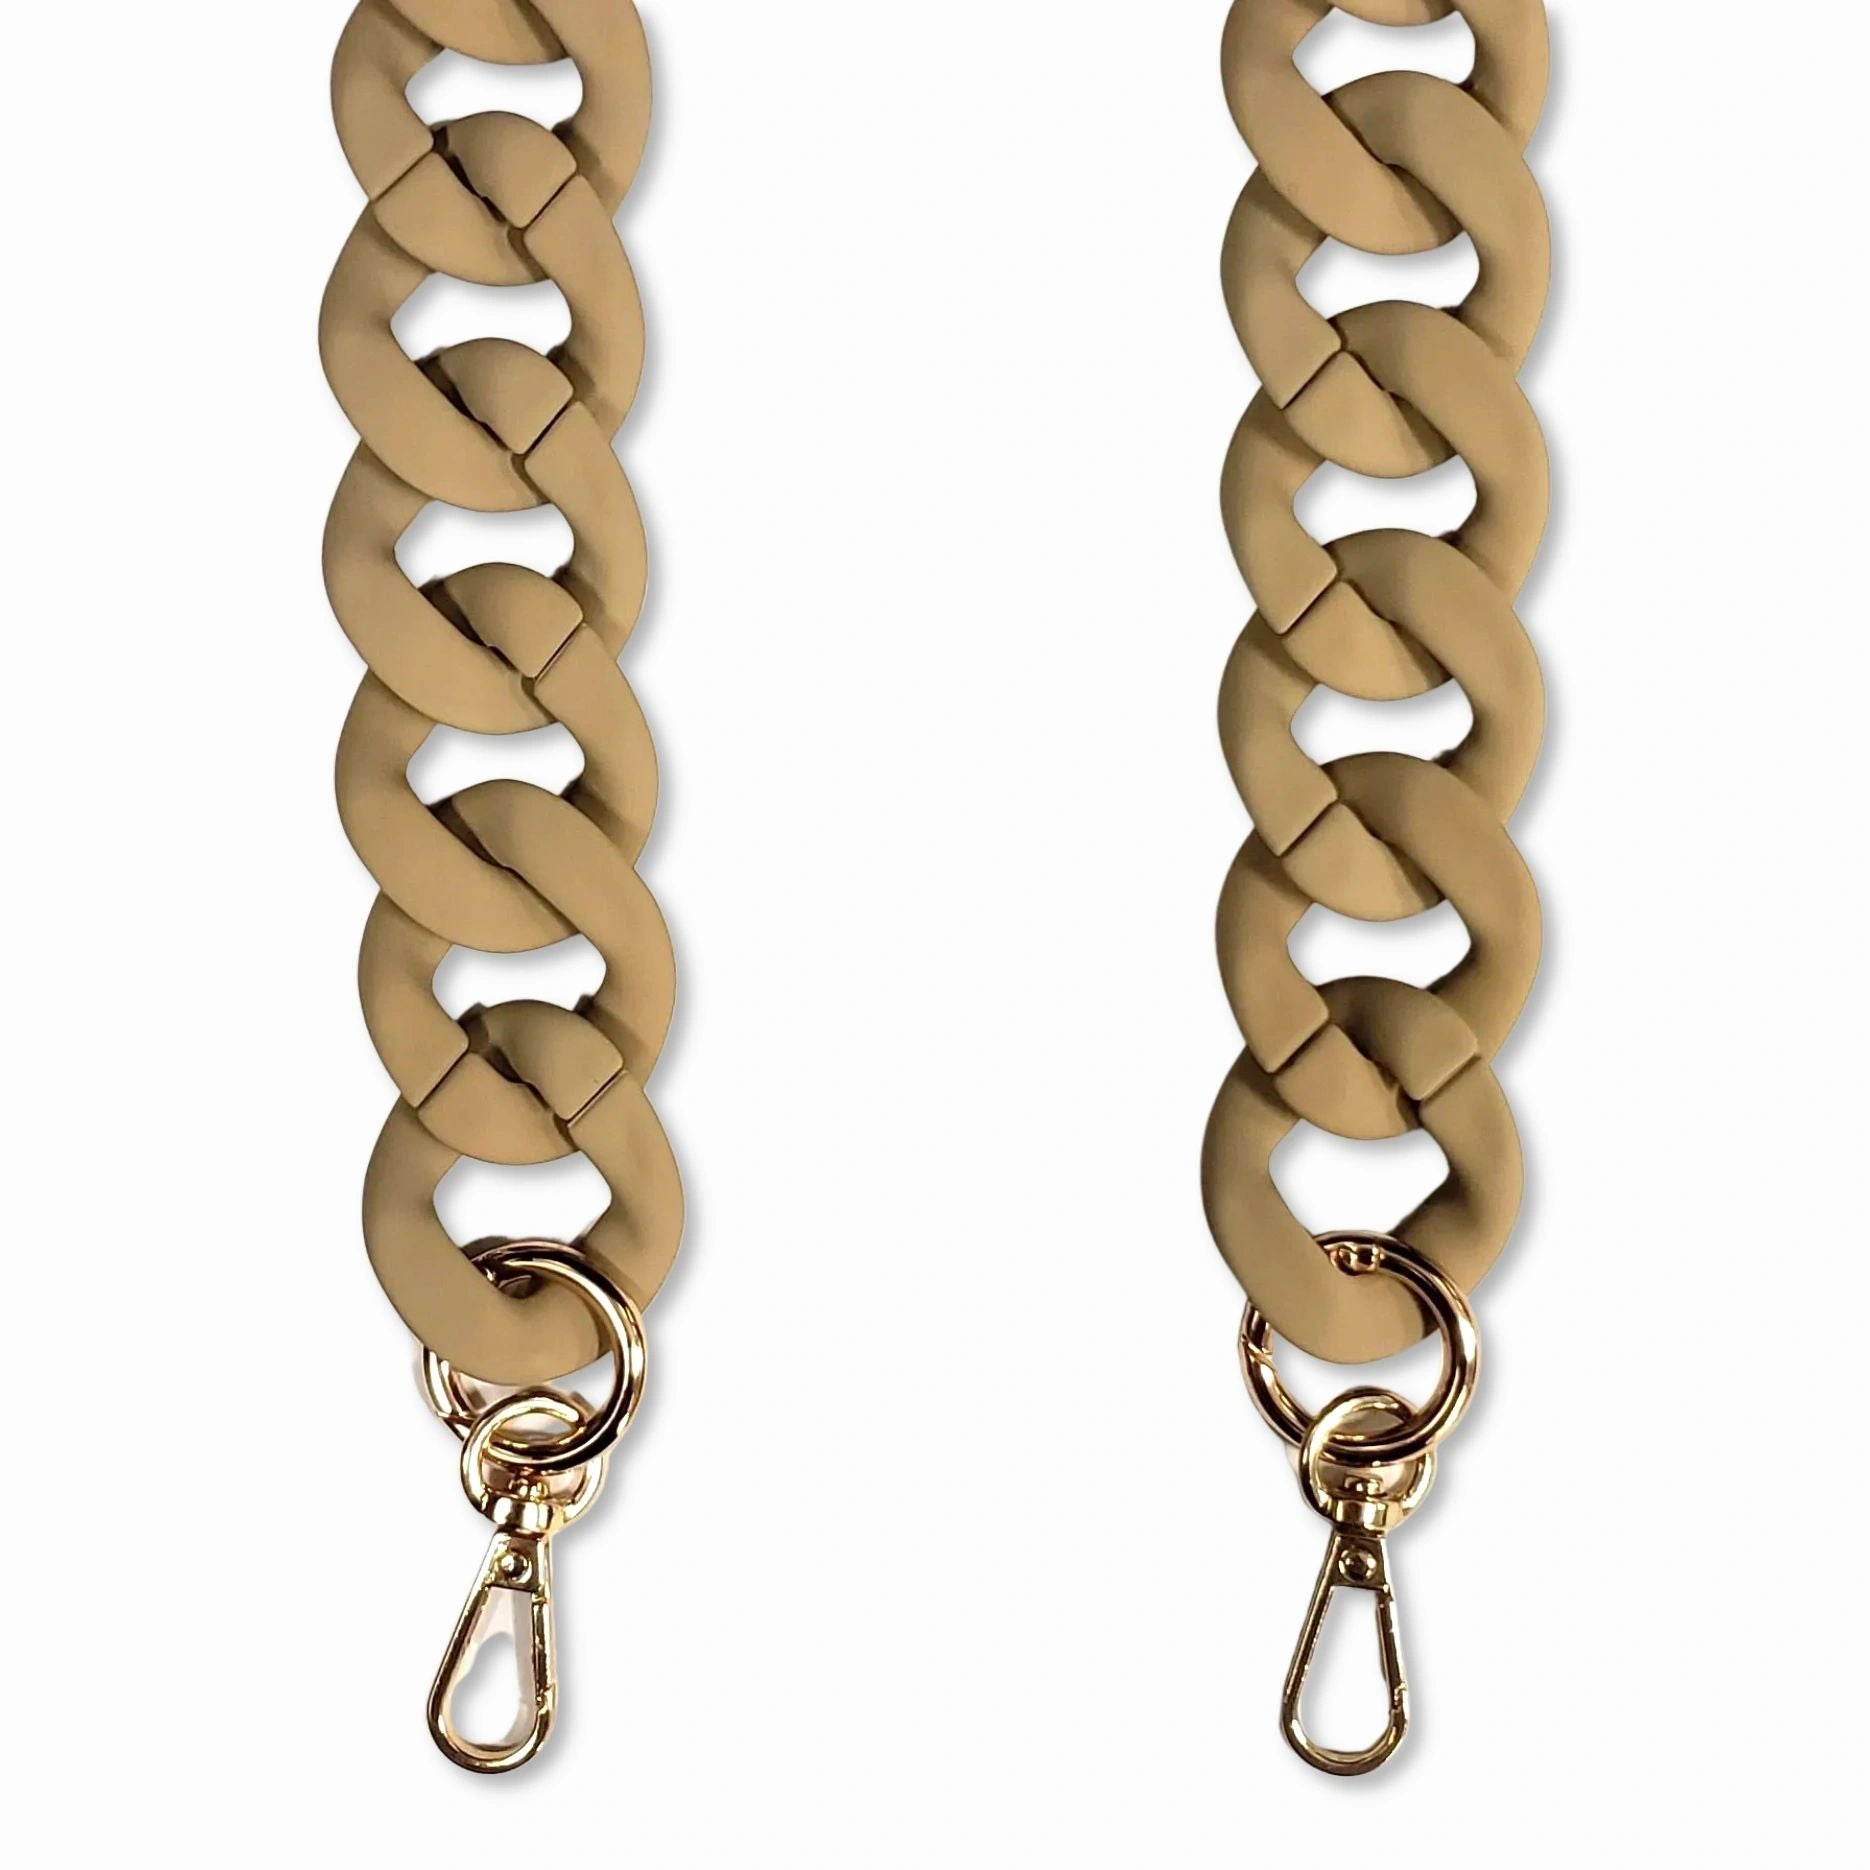 A close-up view of a Taupe-colored oval link long phone chain made of matte resin with golden carabiners.